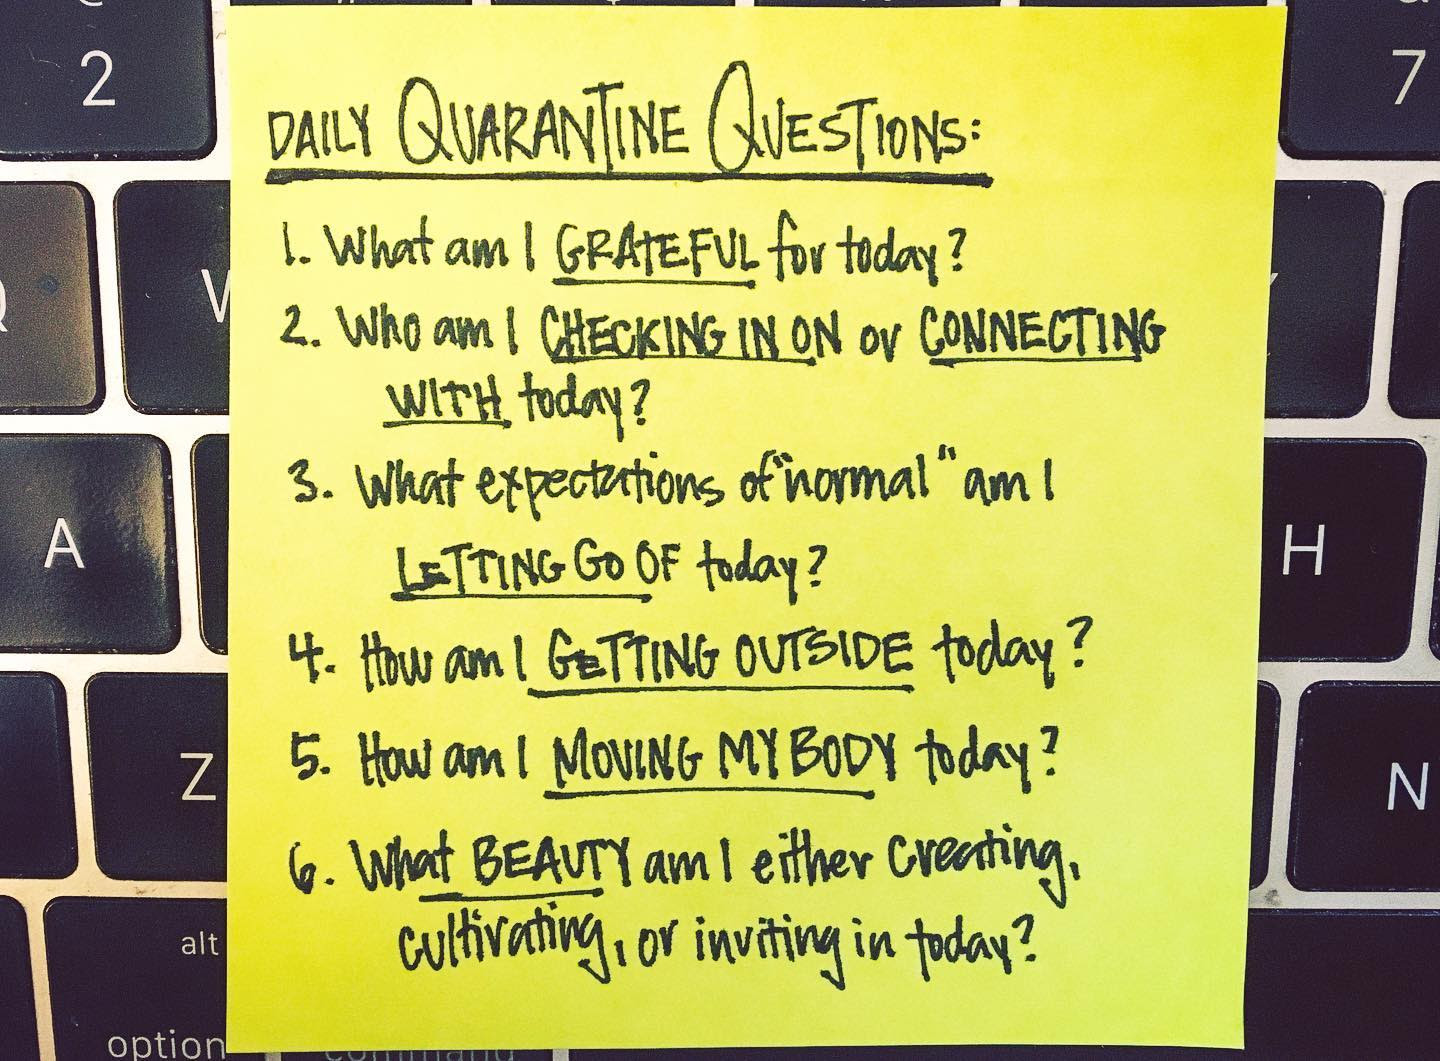 A post-it note that reads, "Daily Quarantine Questions: 1. What am I GRATEFUL for today? 2. Who am I CHECKING IN ON or CONNECTING WITH today? 3. What expectations of "normal" am I LETTING GO OF today? 4. How am I GETTING OUTSIDE today? 5. How am I MOVING MY BODY today? 6. What BEAUTY am I either creating, cultivating, or inviting in today?"